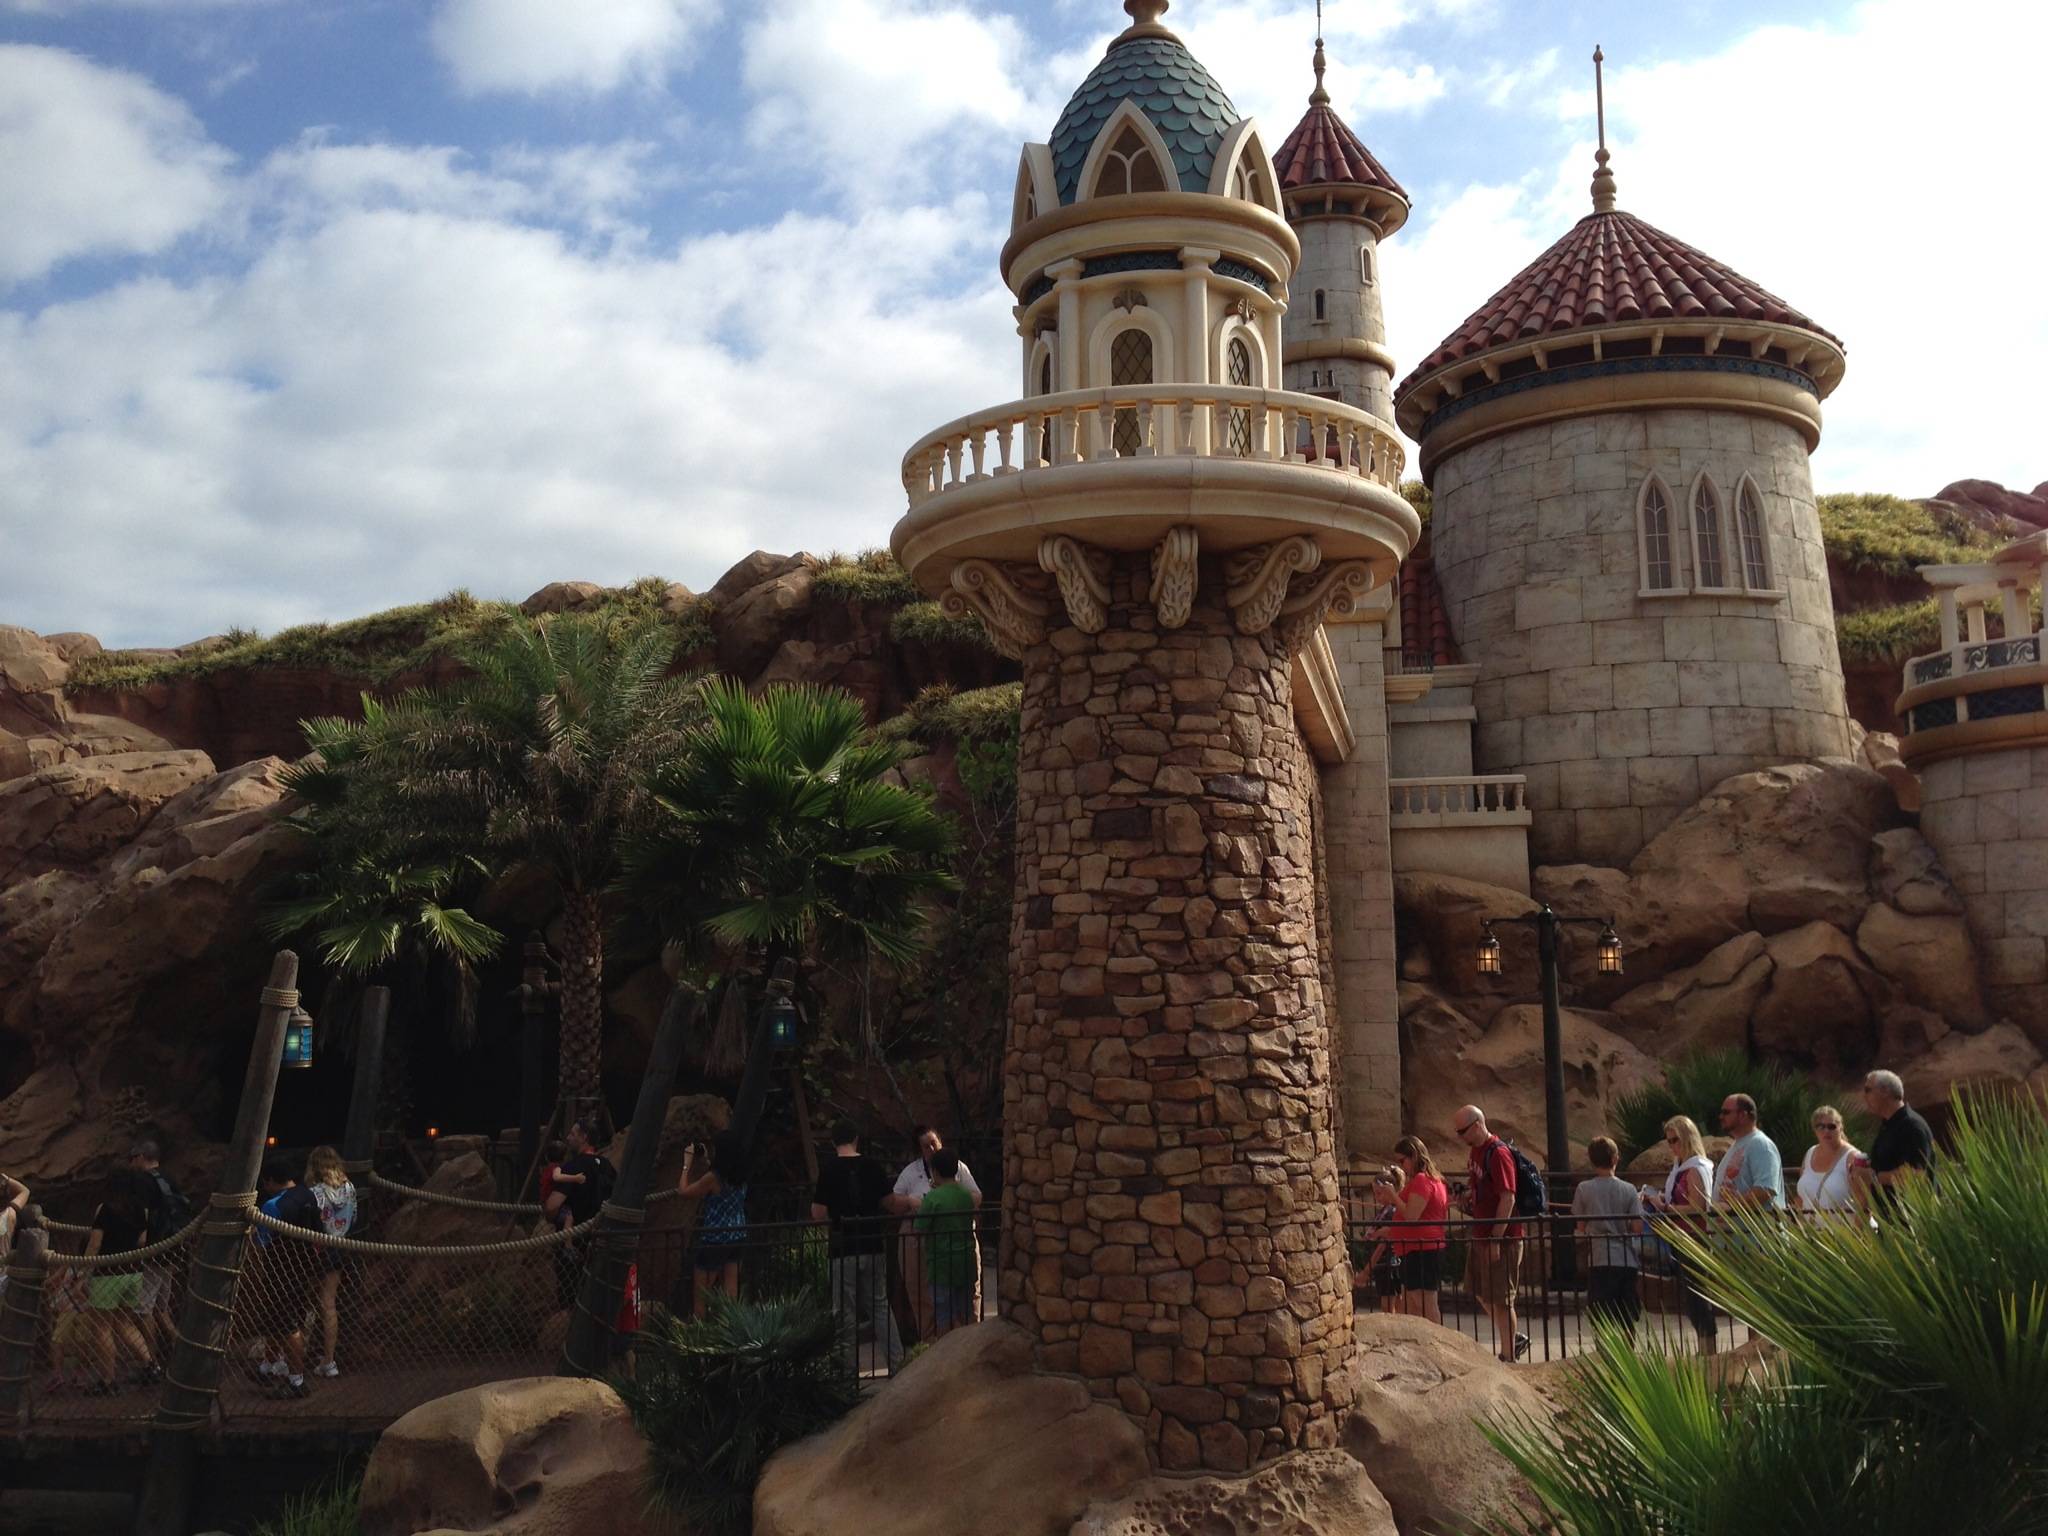 PHOTOS - Fantasyland now in soft opening LIVE UPDATES